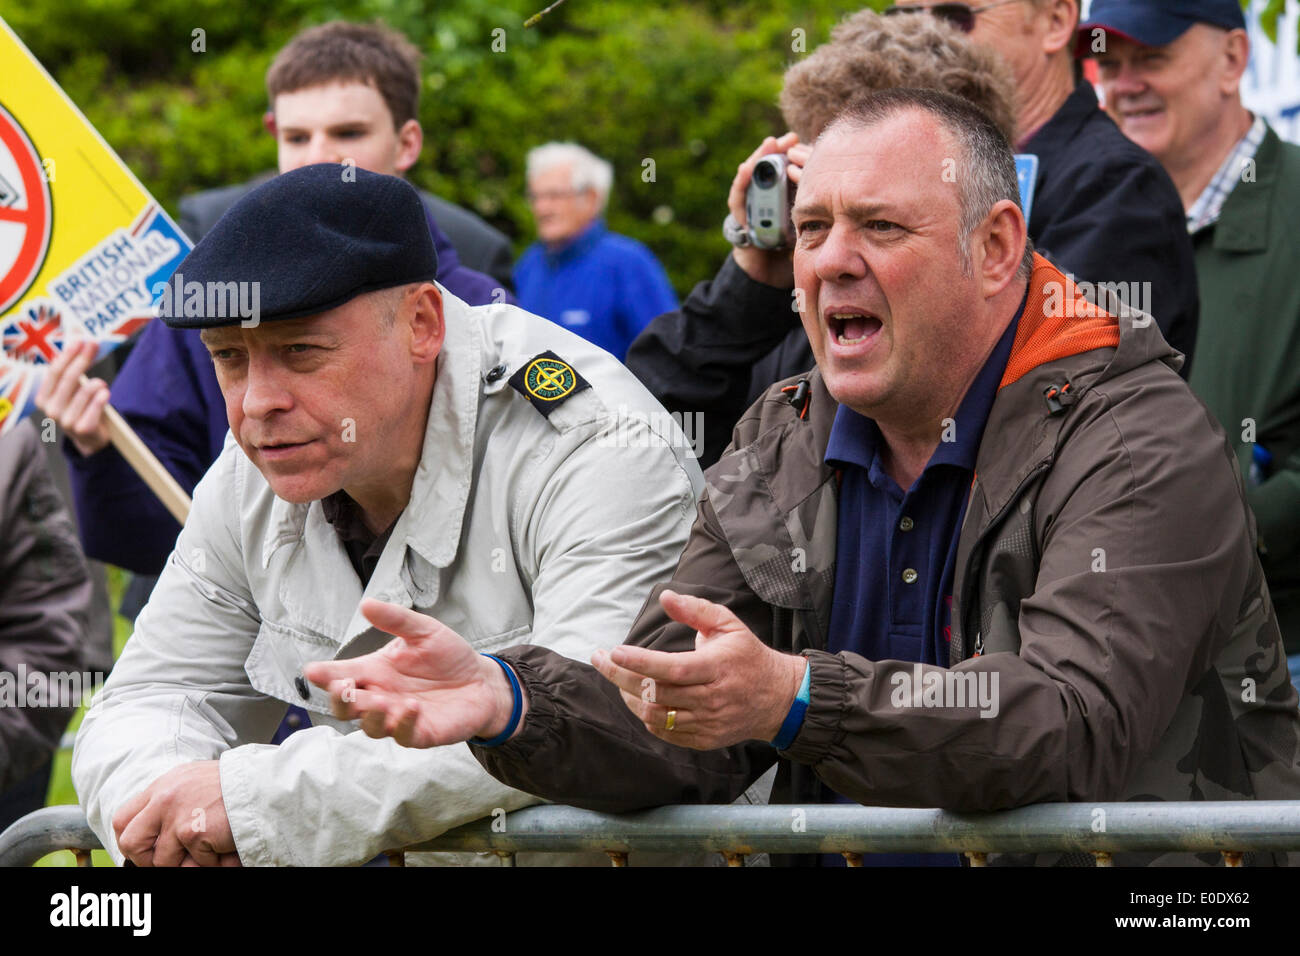 Hemel Hempstead, May 10th 2014. Members of the British National Party and other right wing organisations shout abuse at anti-Fascist counterprotesters who were penned about 70 metres from the BNP's position. Credit:  Paul Davey/Alamy Live News Stock Photo